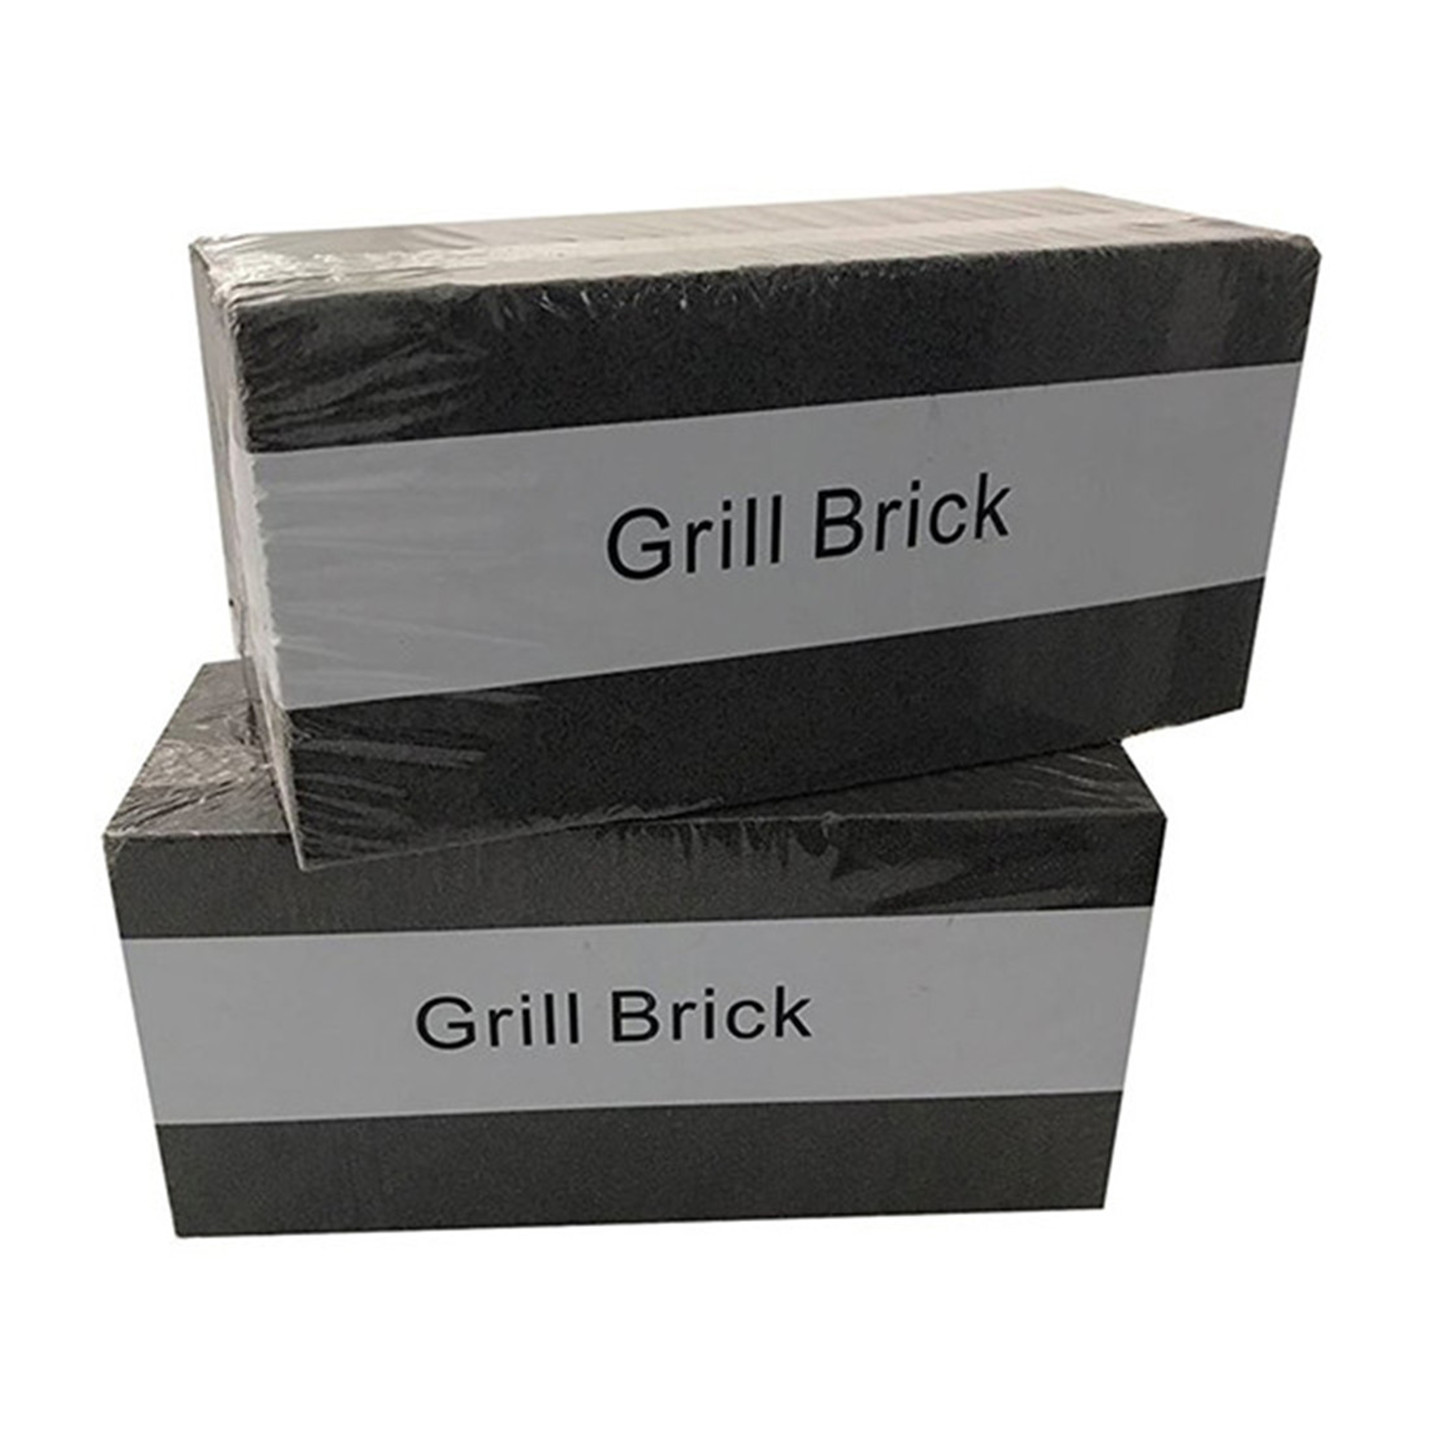 Griddle Brick Cleaning Block factory from China